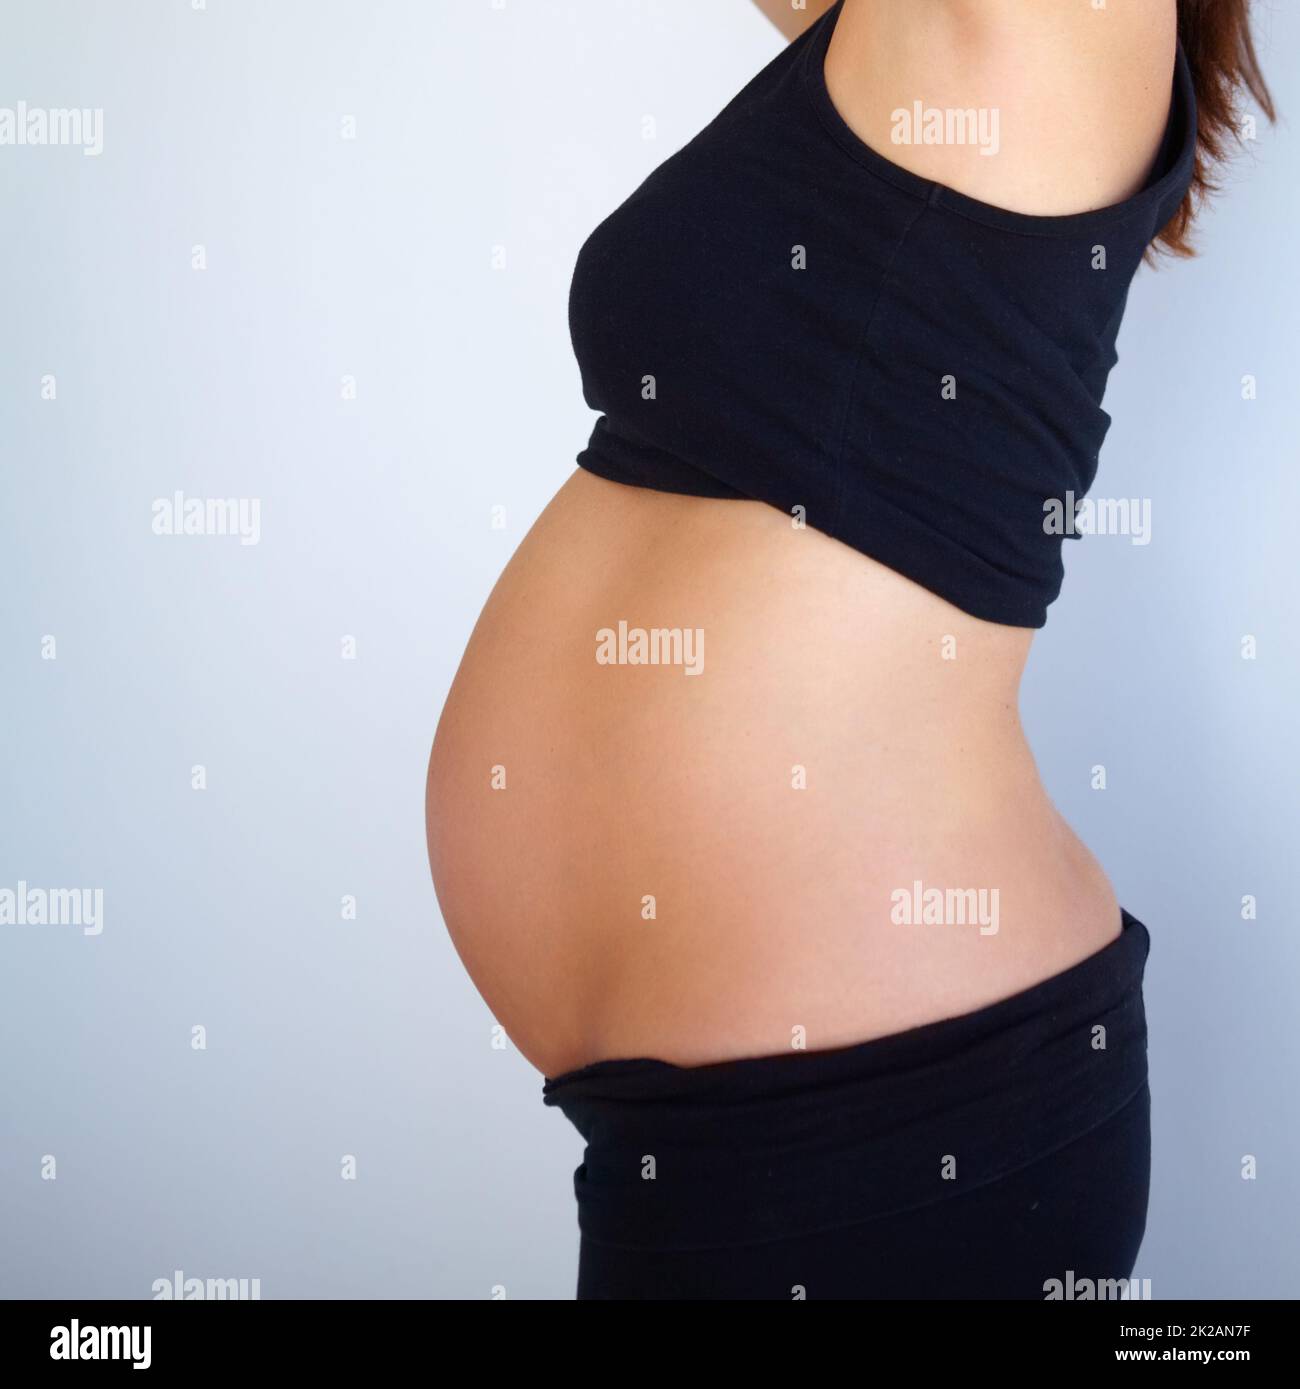 Proud of what my husband and I created. Side angle view of pregnant womanamp039s stomach. Stock Photo